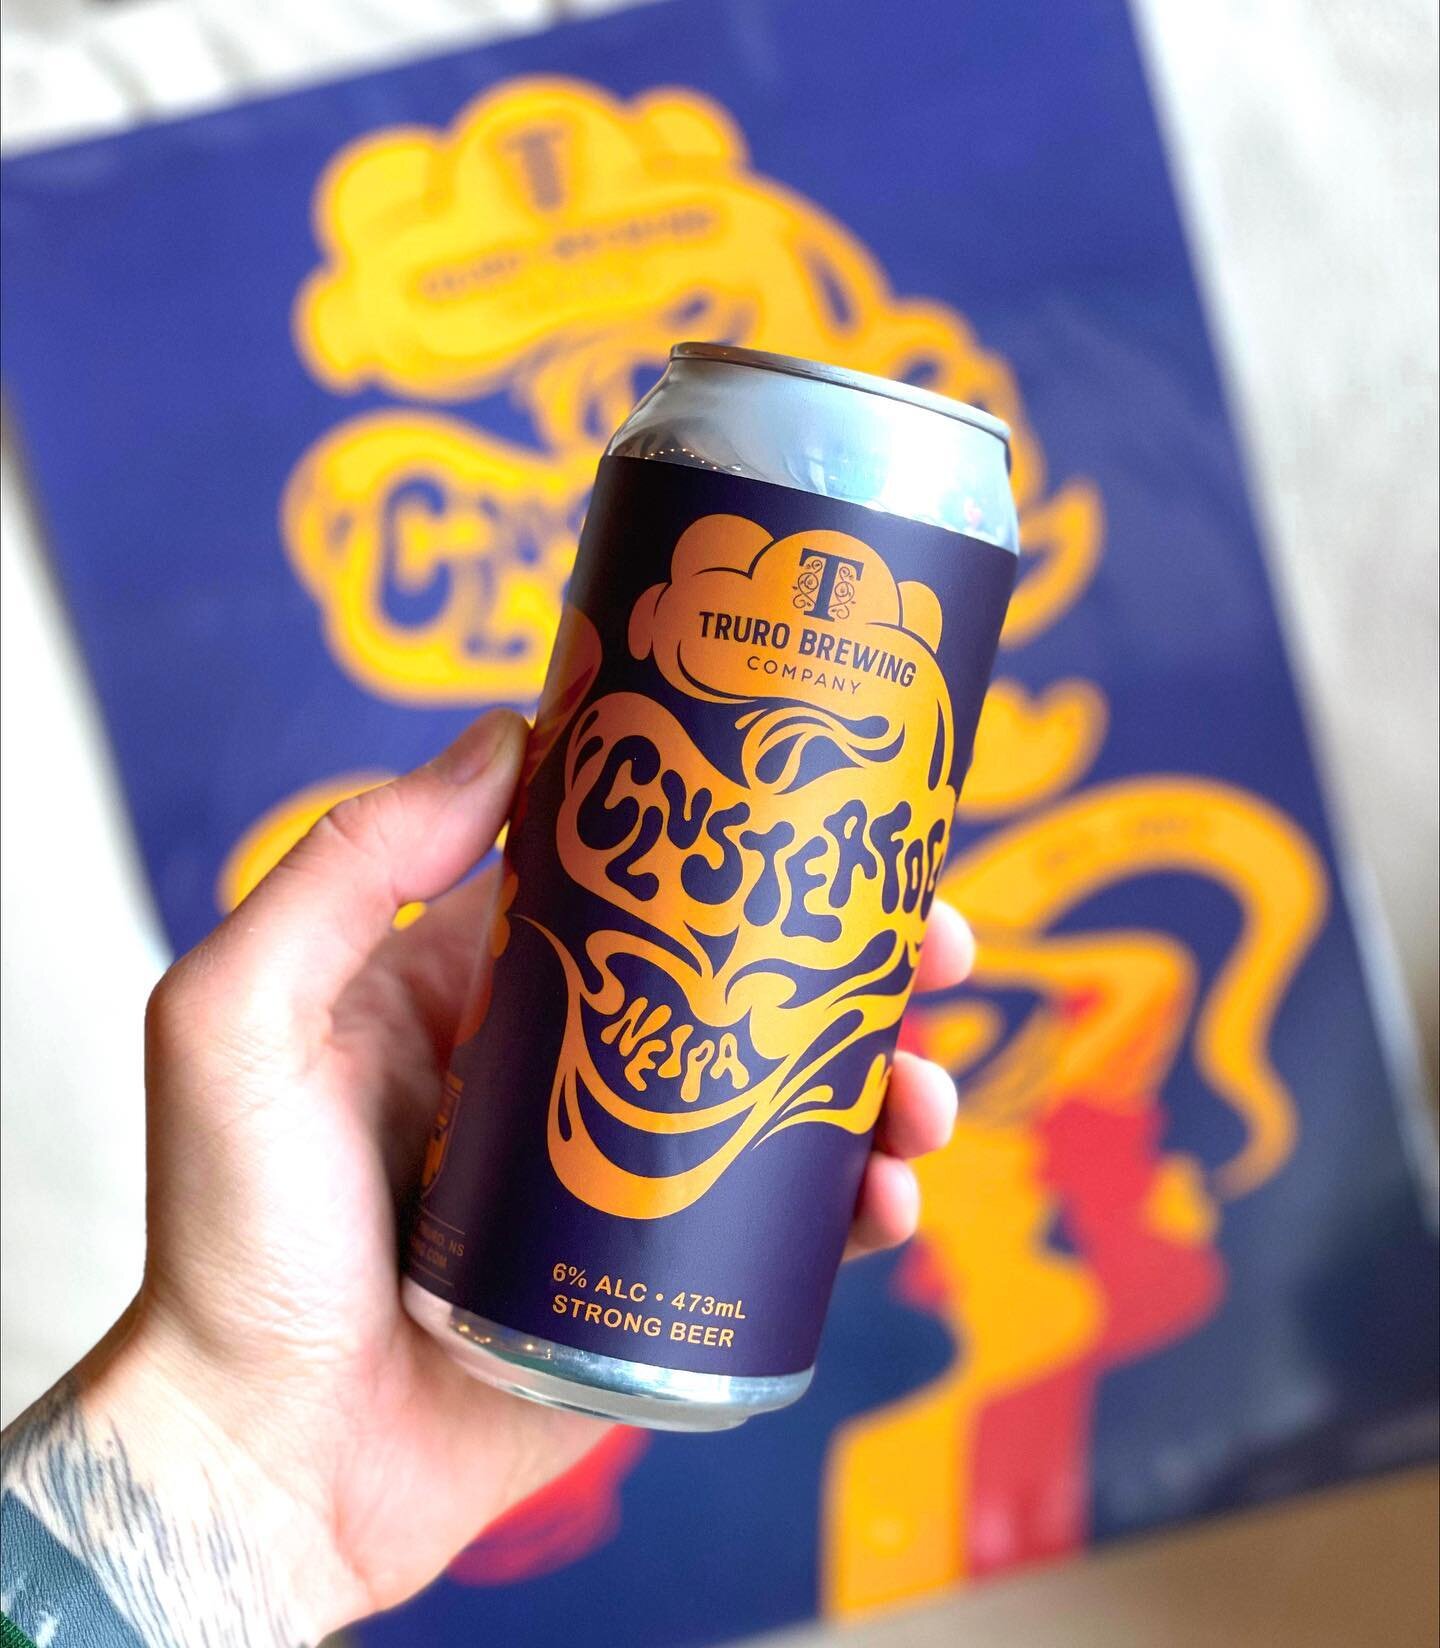 Clusterfog New England IPA is back in cans! 

A great first step into the world of IPA&rsquo;s, Clusterfog is less bitter and has a juicy stone fruity flavour.